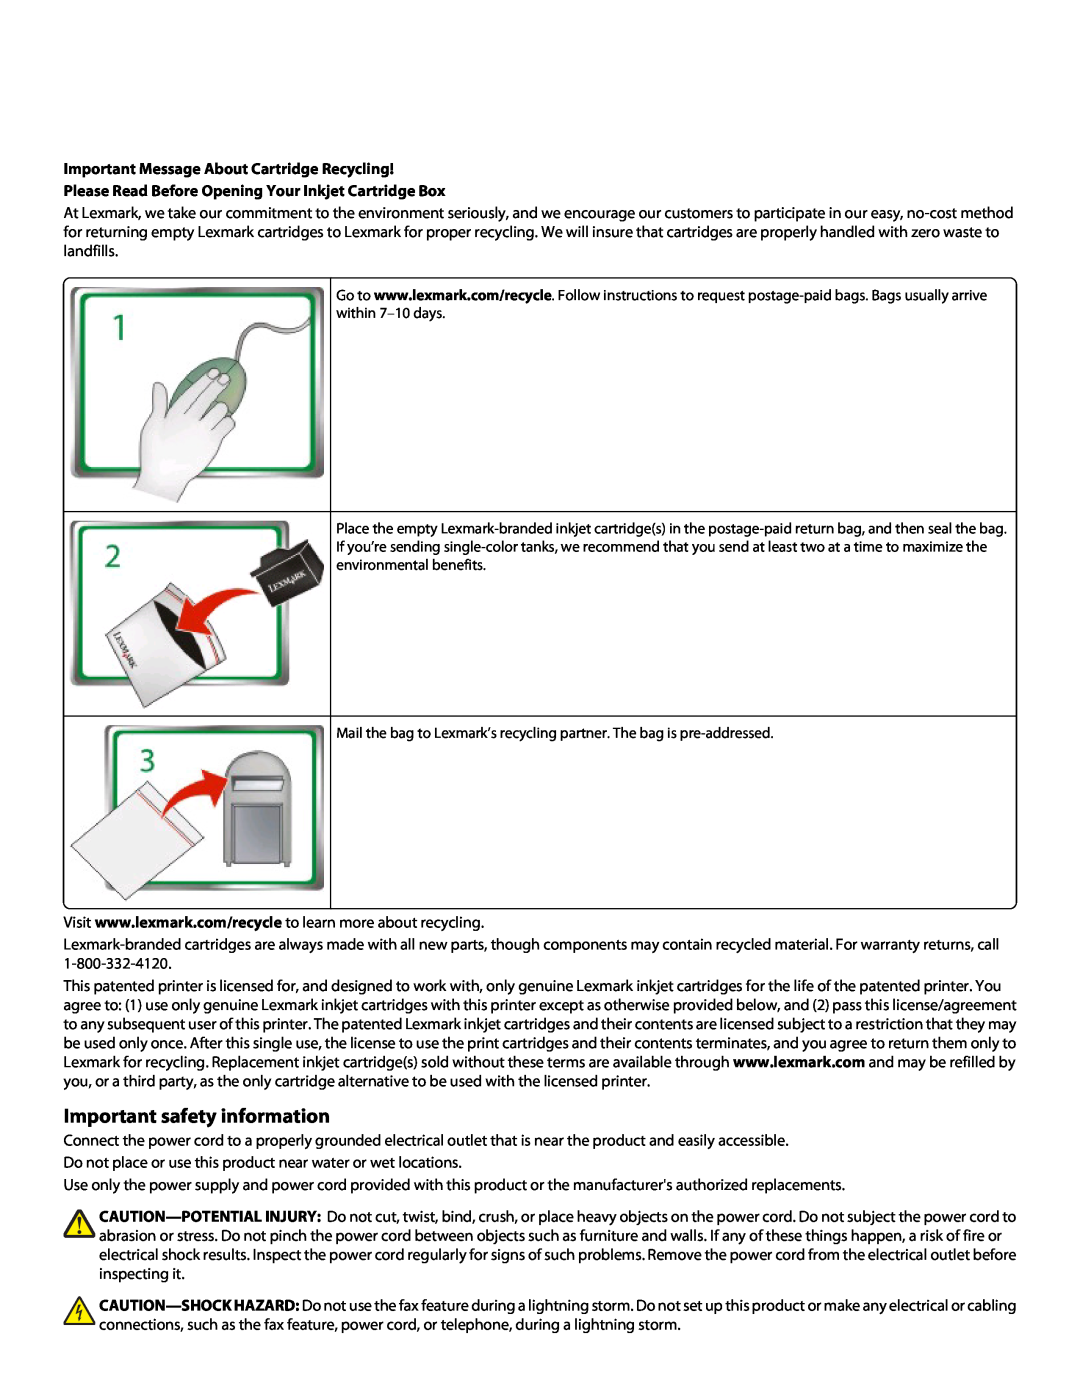 Lexmark S600 manual Important safety information, Important Message About Cartridge Recycling 